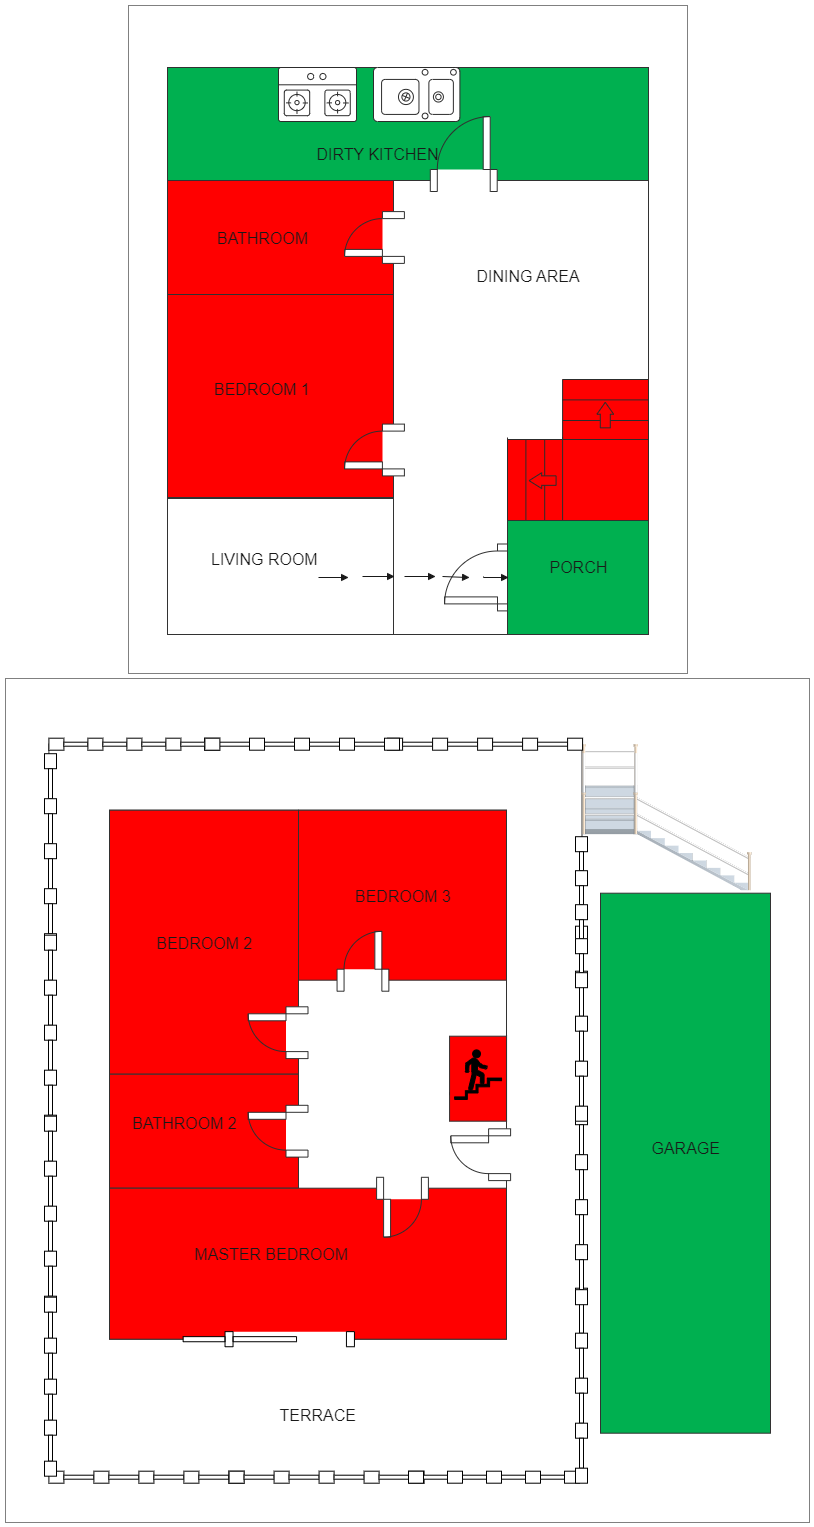 Emergency Resource Map for Two-story Building